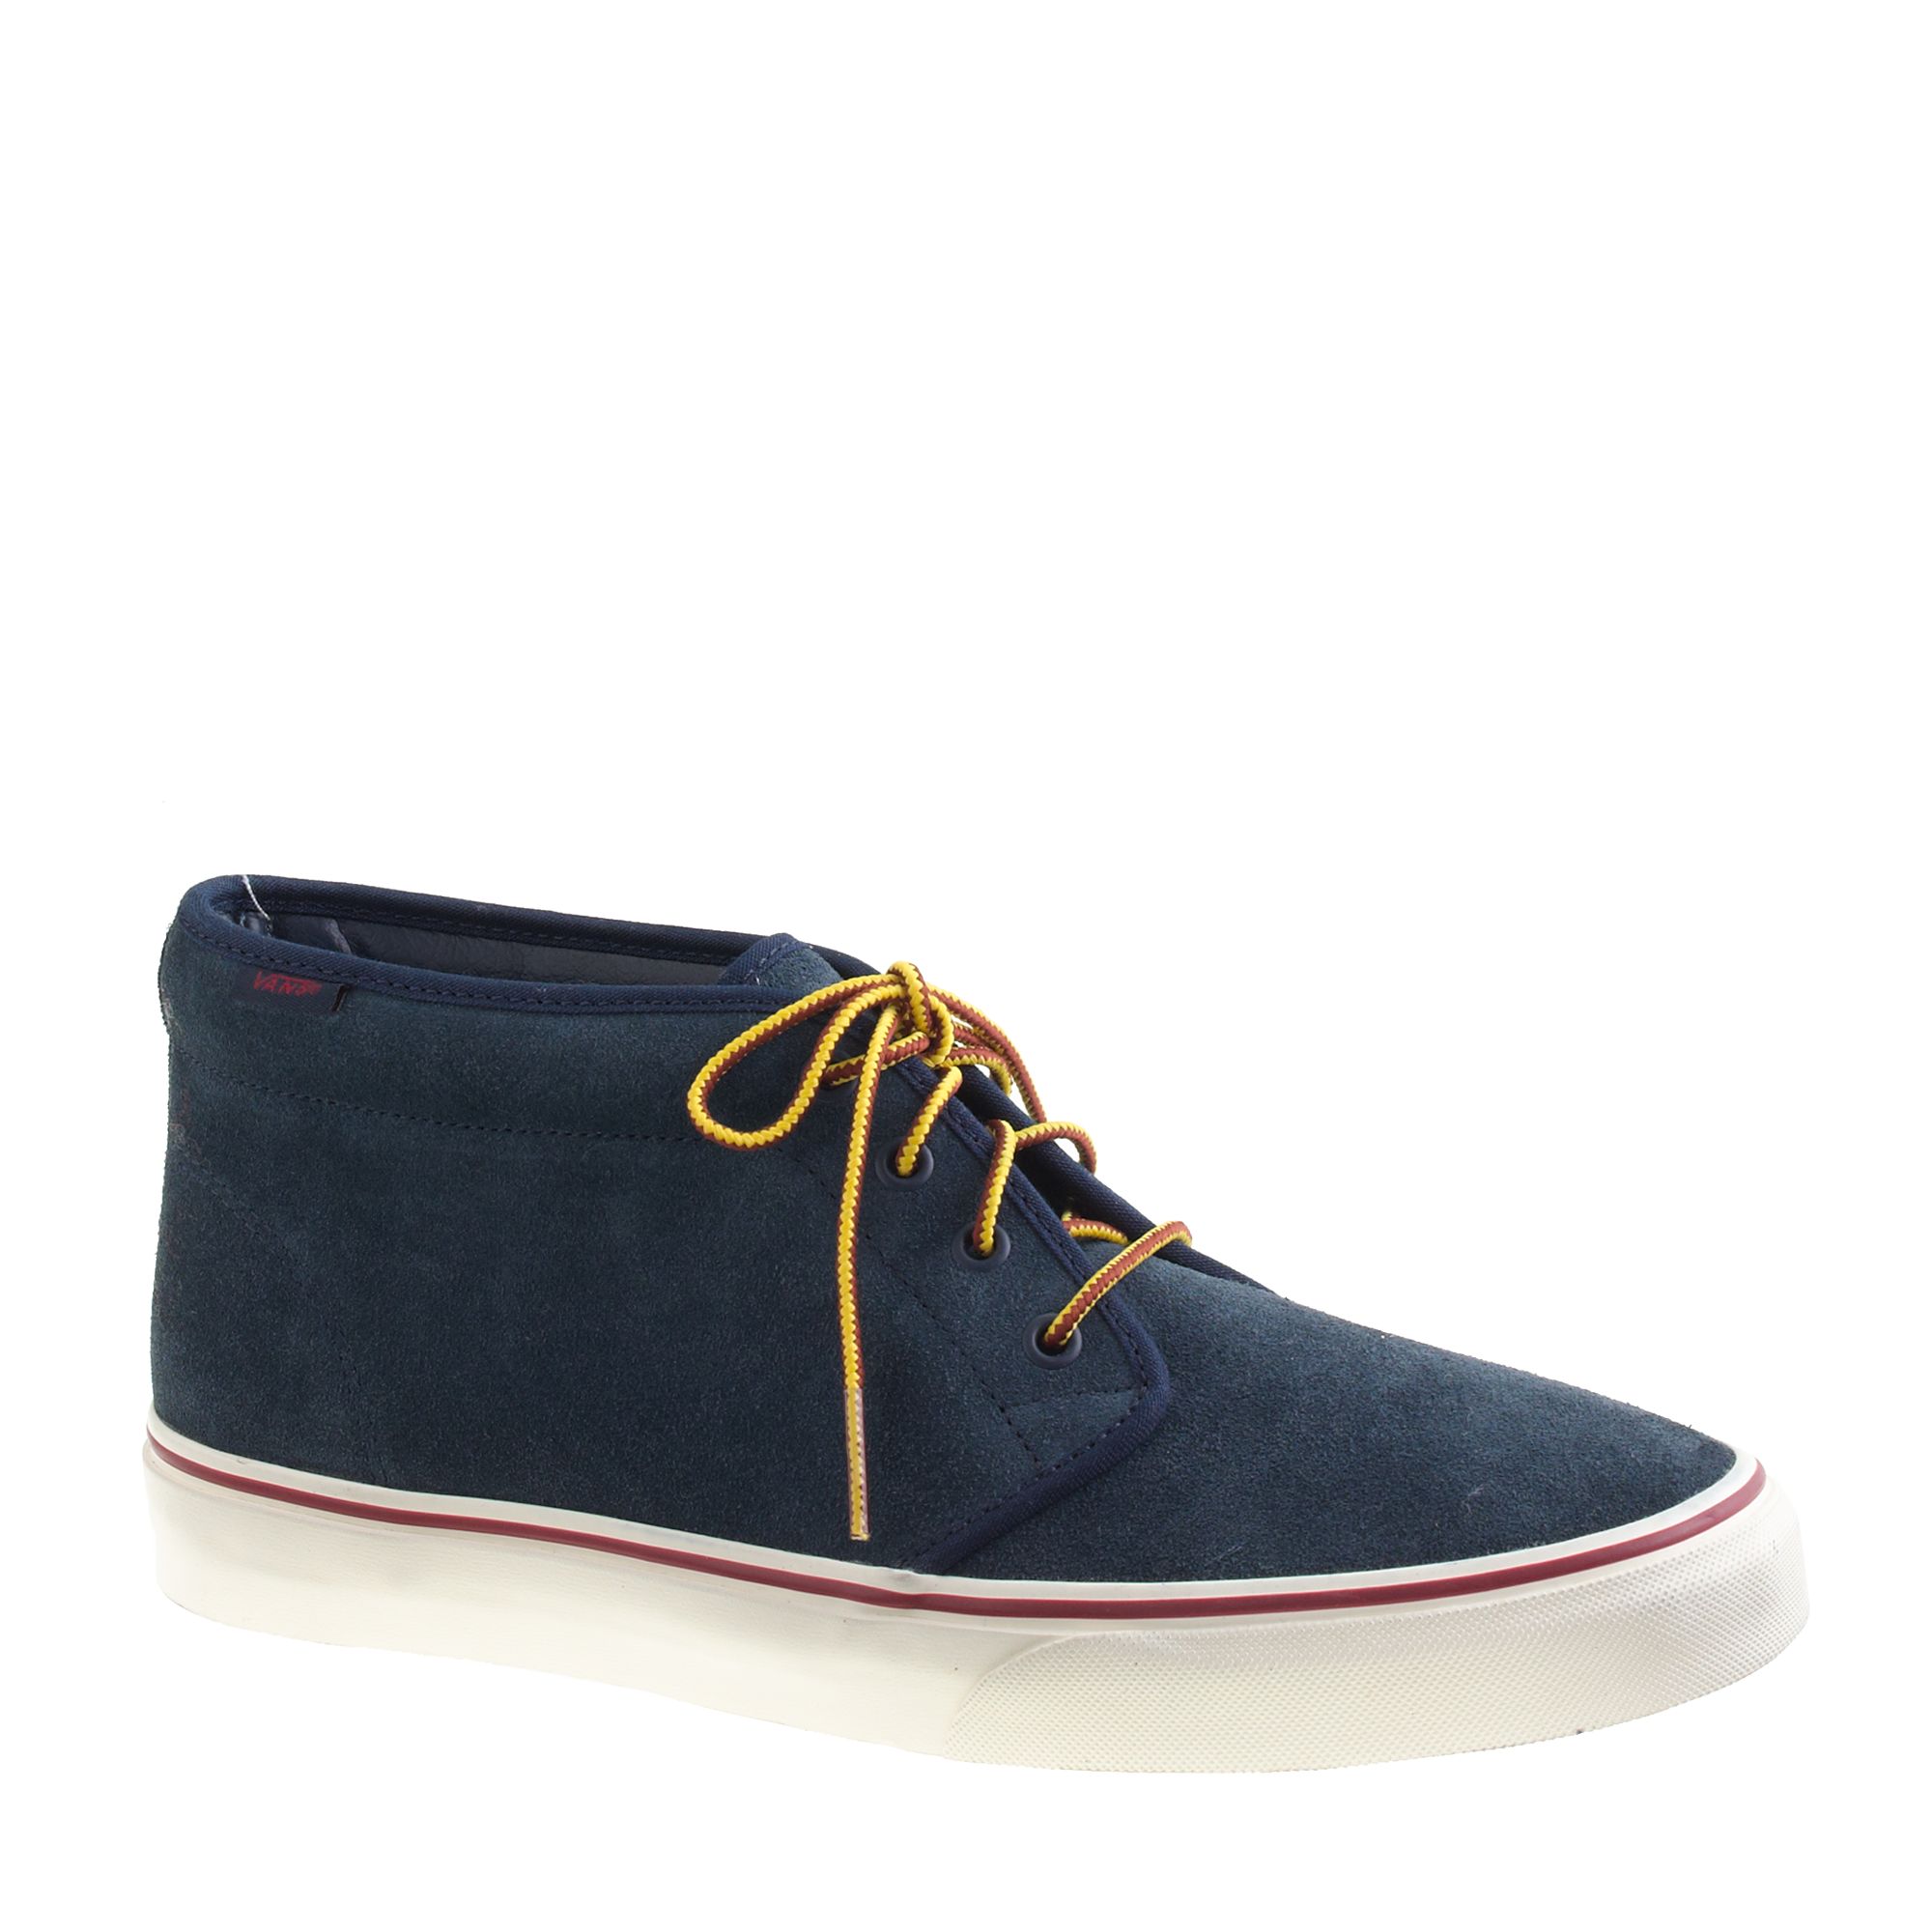 J.crew Suede Chukka Boots in Blue for Men (dress blues) Lyst